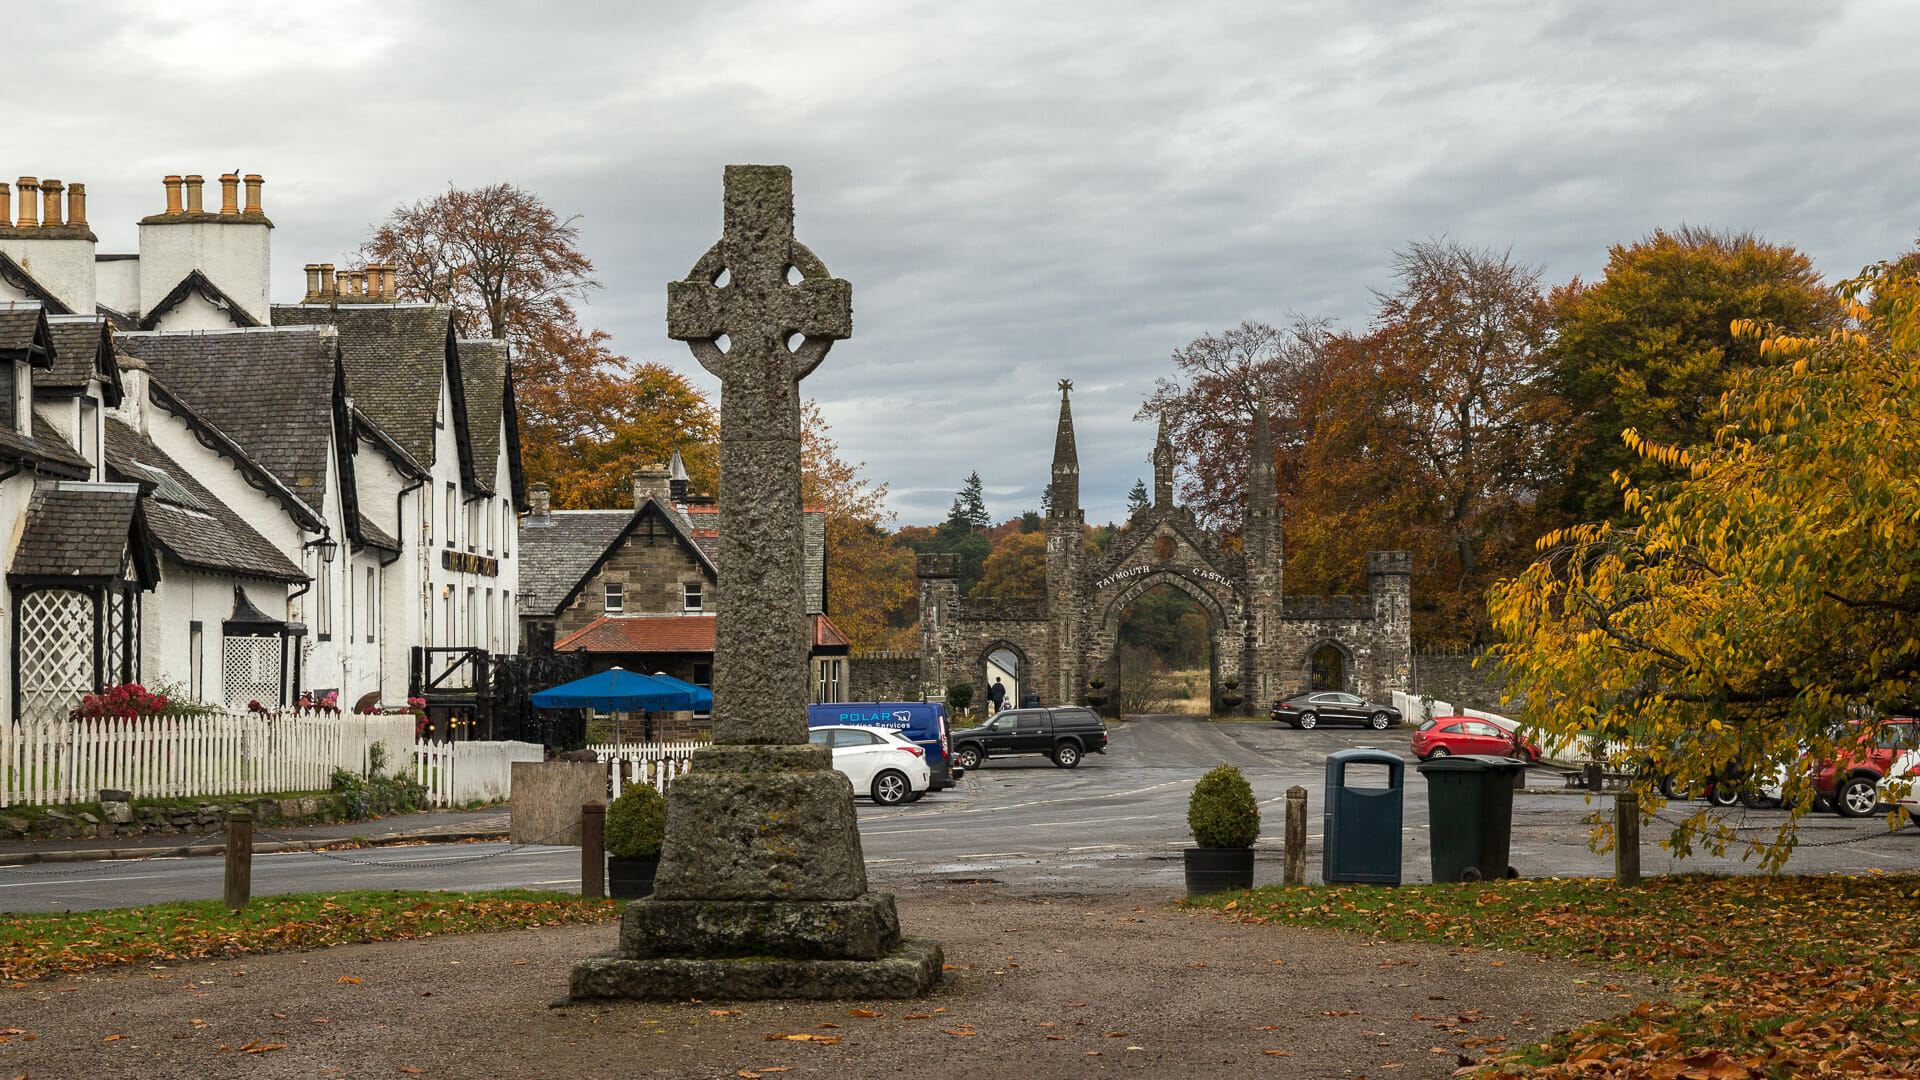 "The Square" in Kenmore